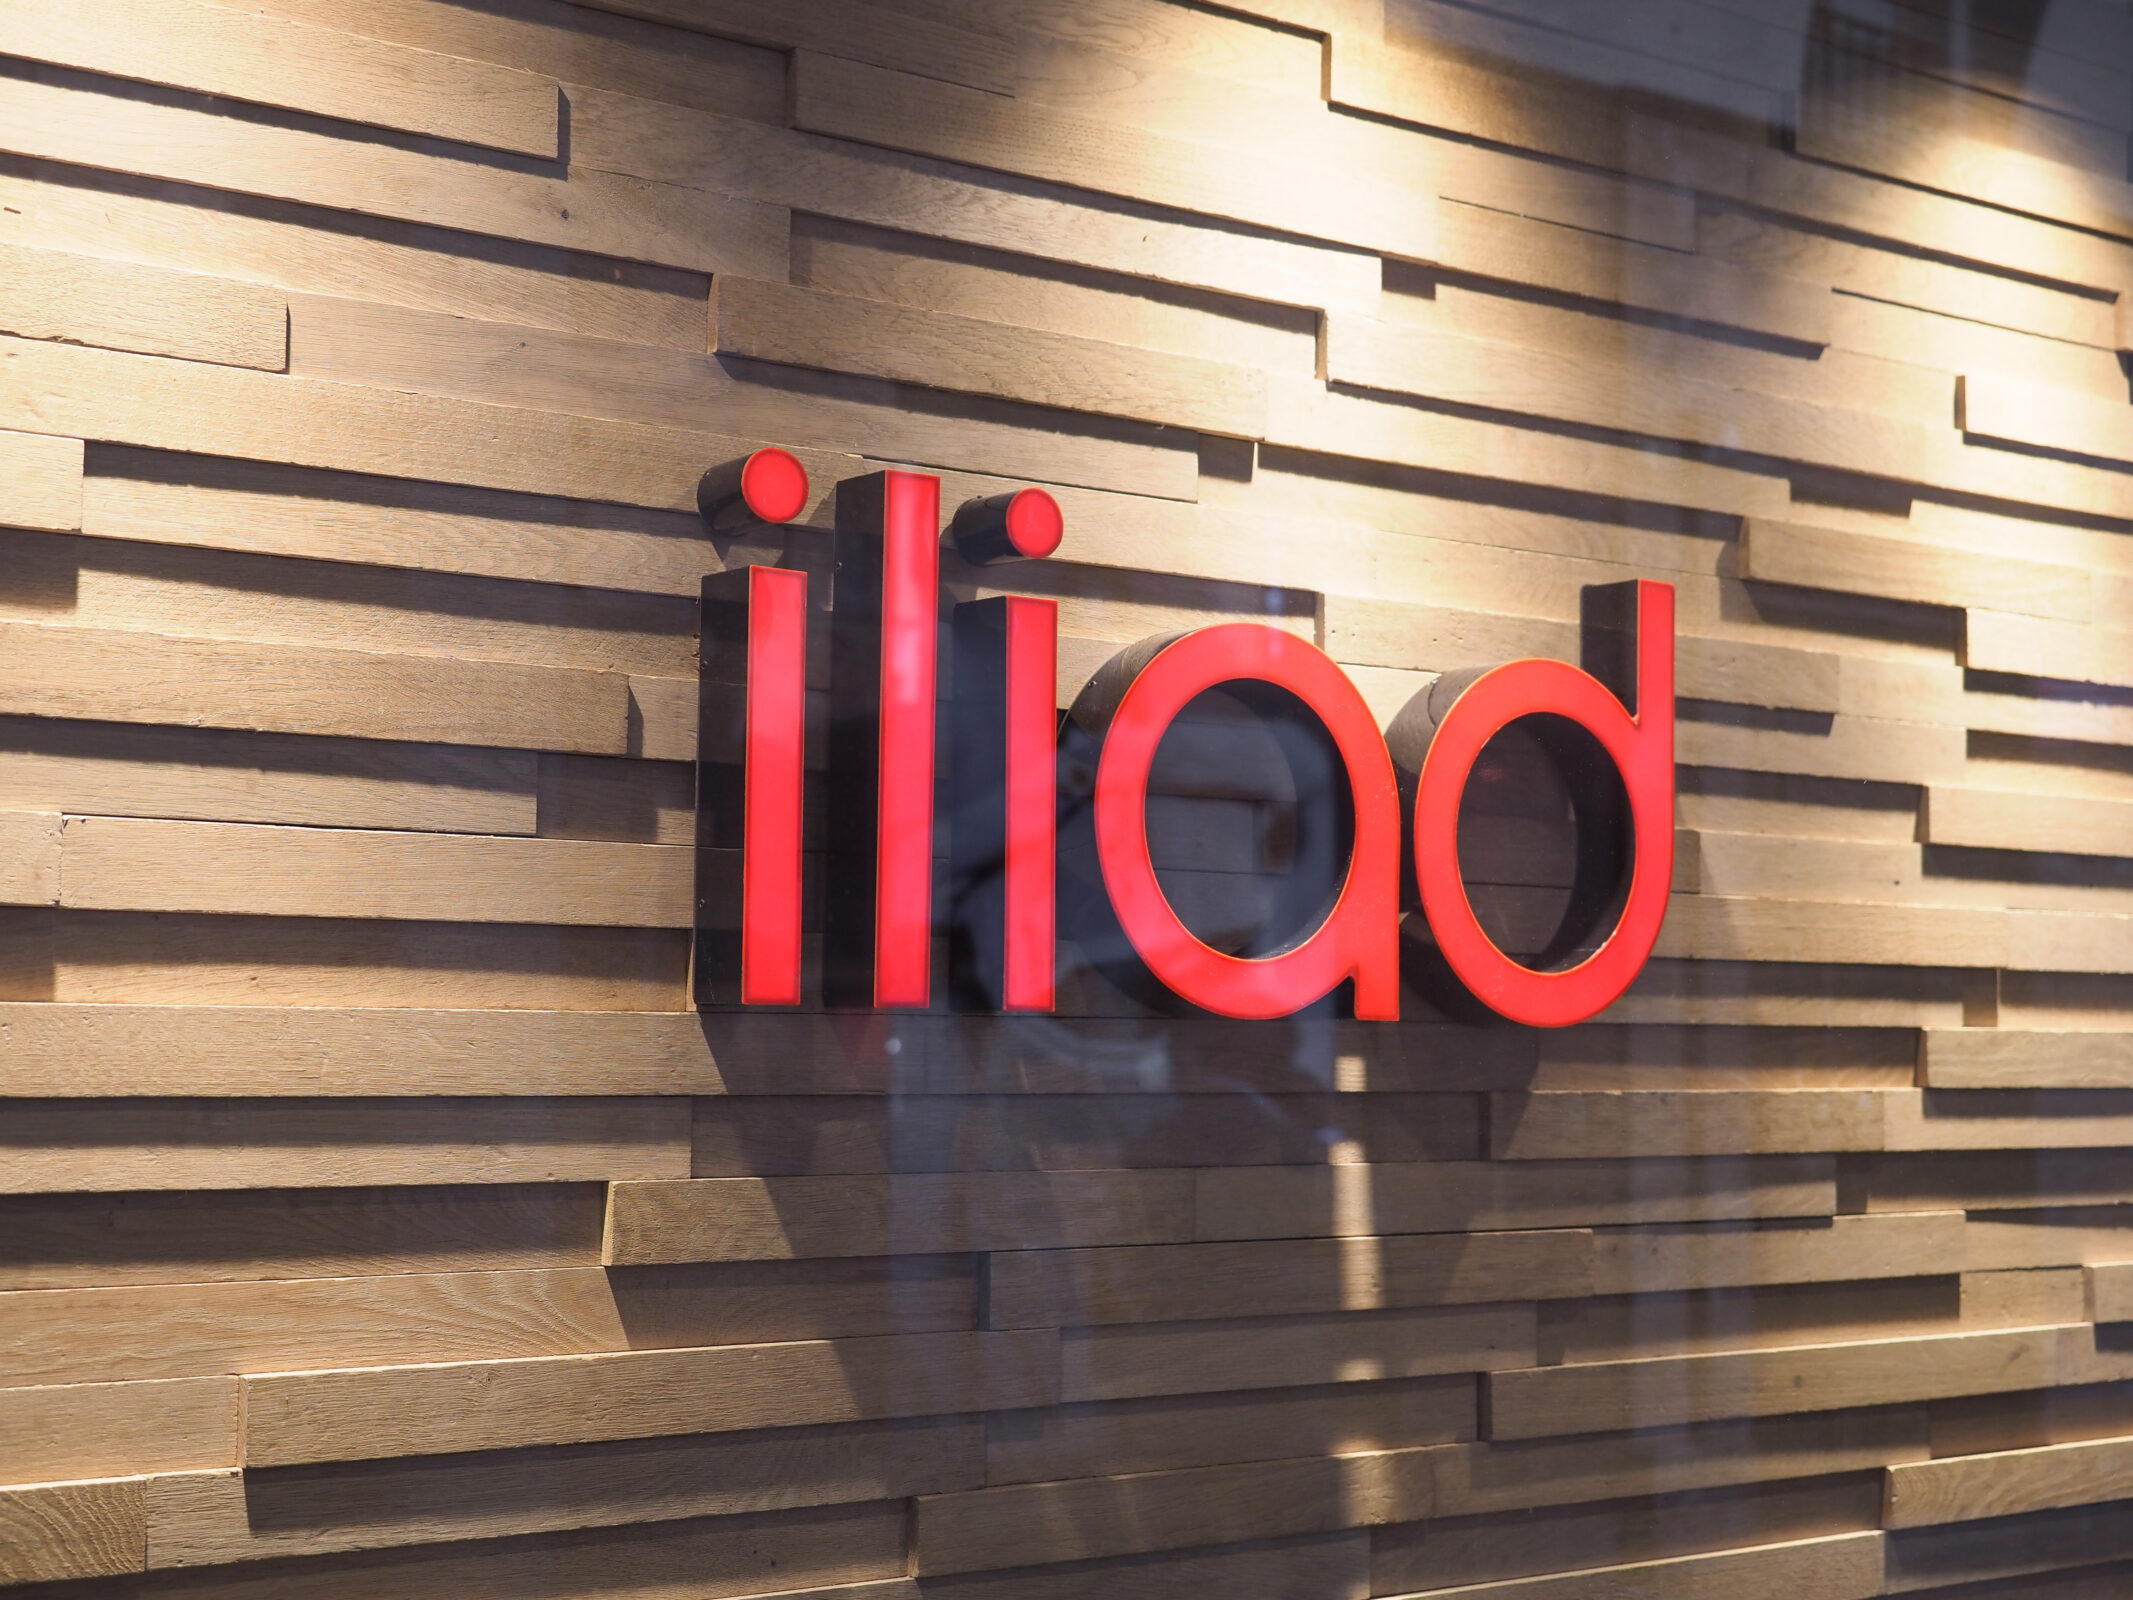 iliad, at this time the inauguration of the Flagship retailer in Catania: this is the place and when